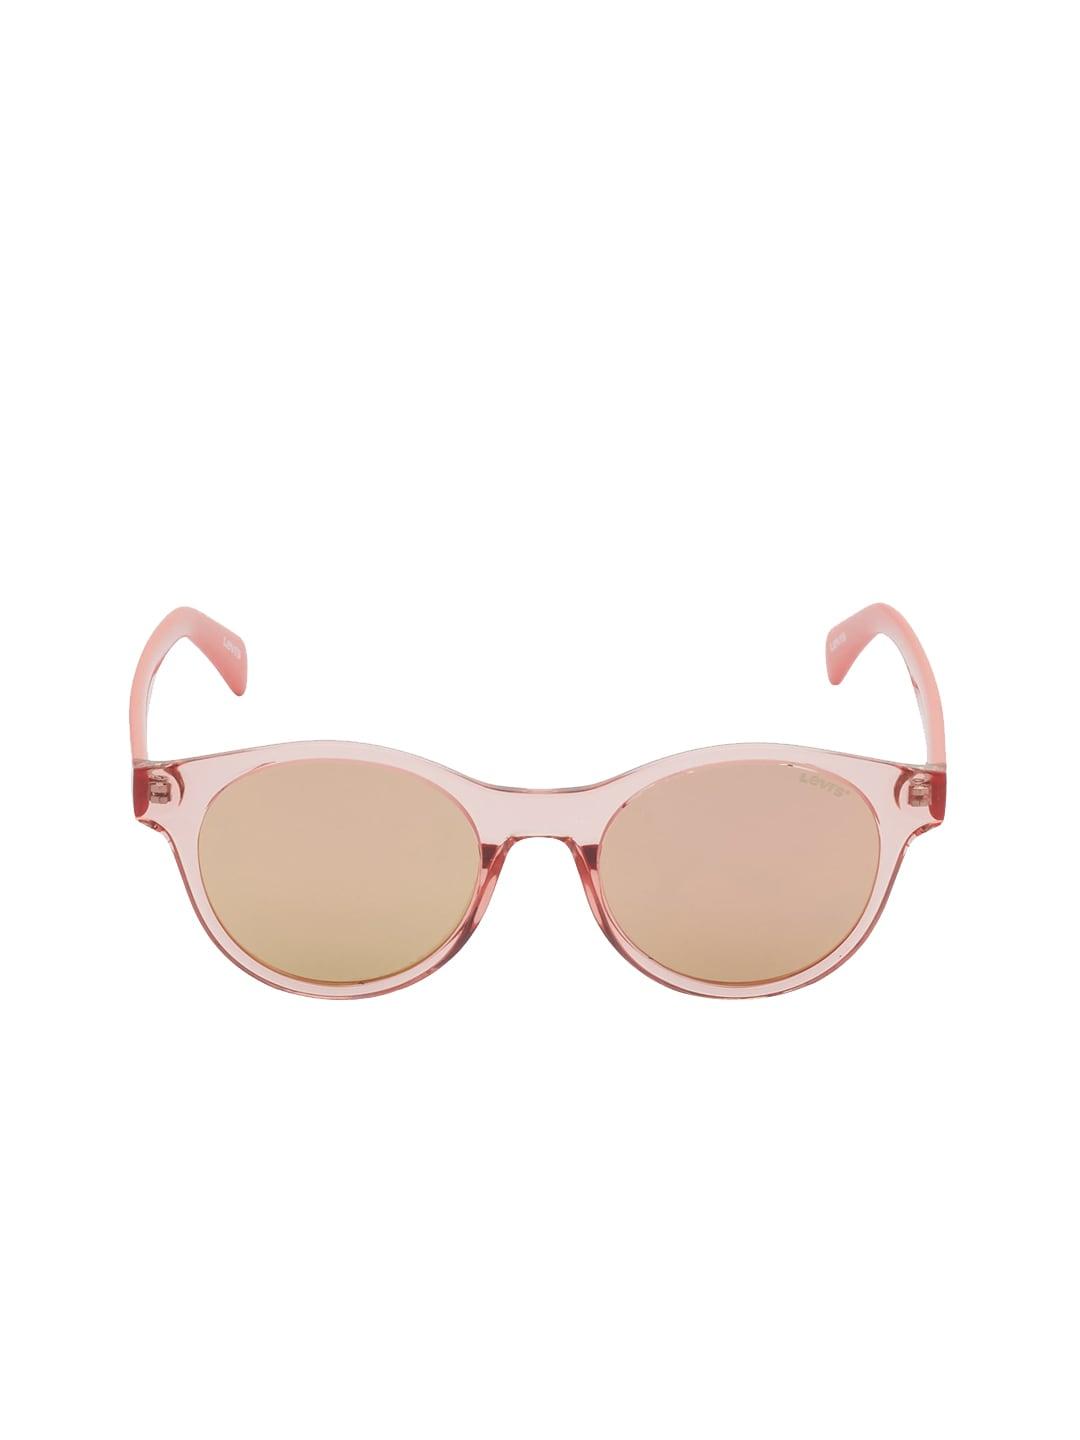 levis-women-solid-uv-protected-round-sunglasses-lv-1000/s-35j-510j